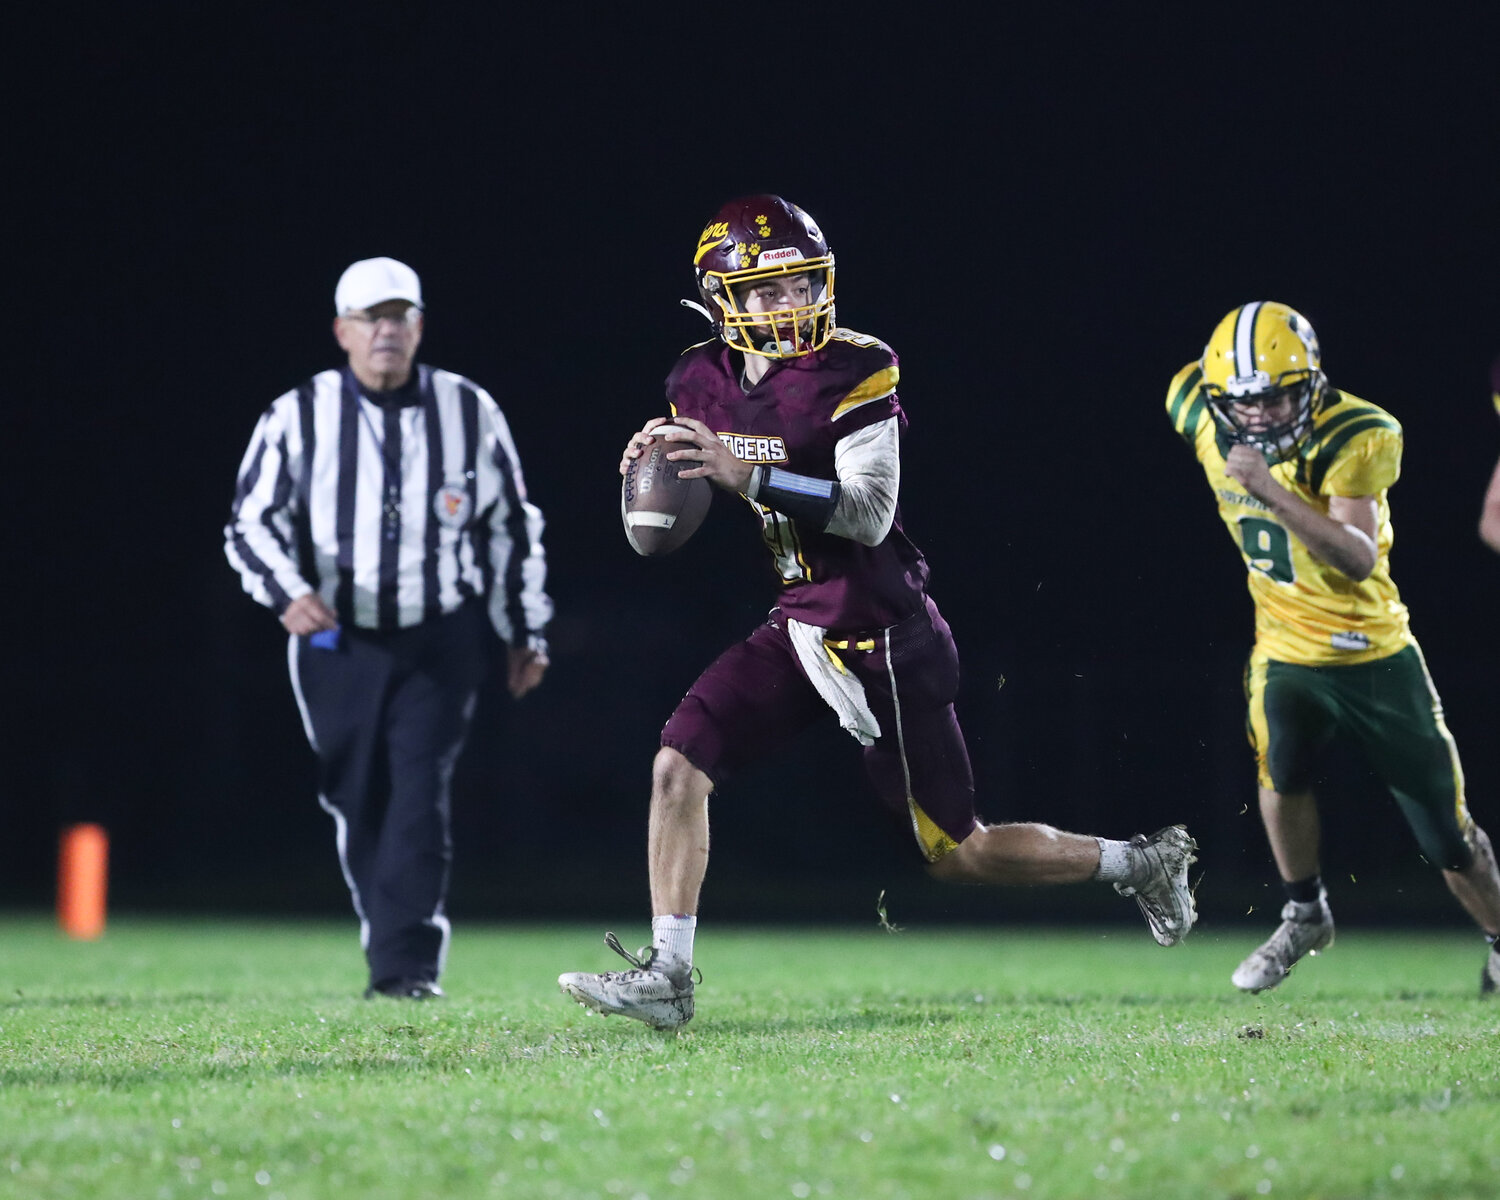 Quarterback Ben Troia looks to pass as he is forced outside the pocket.